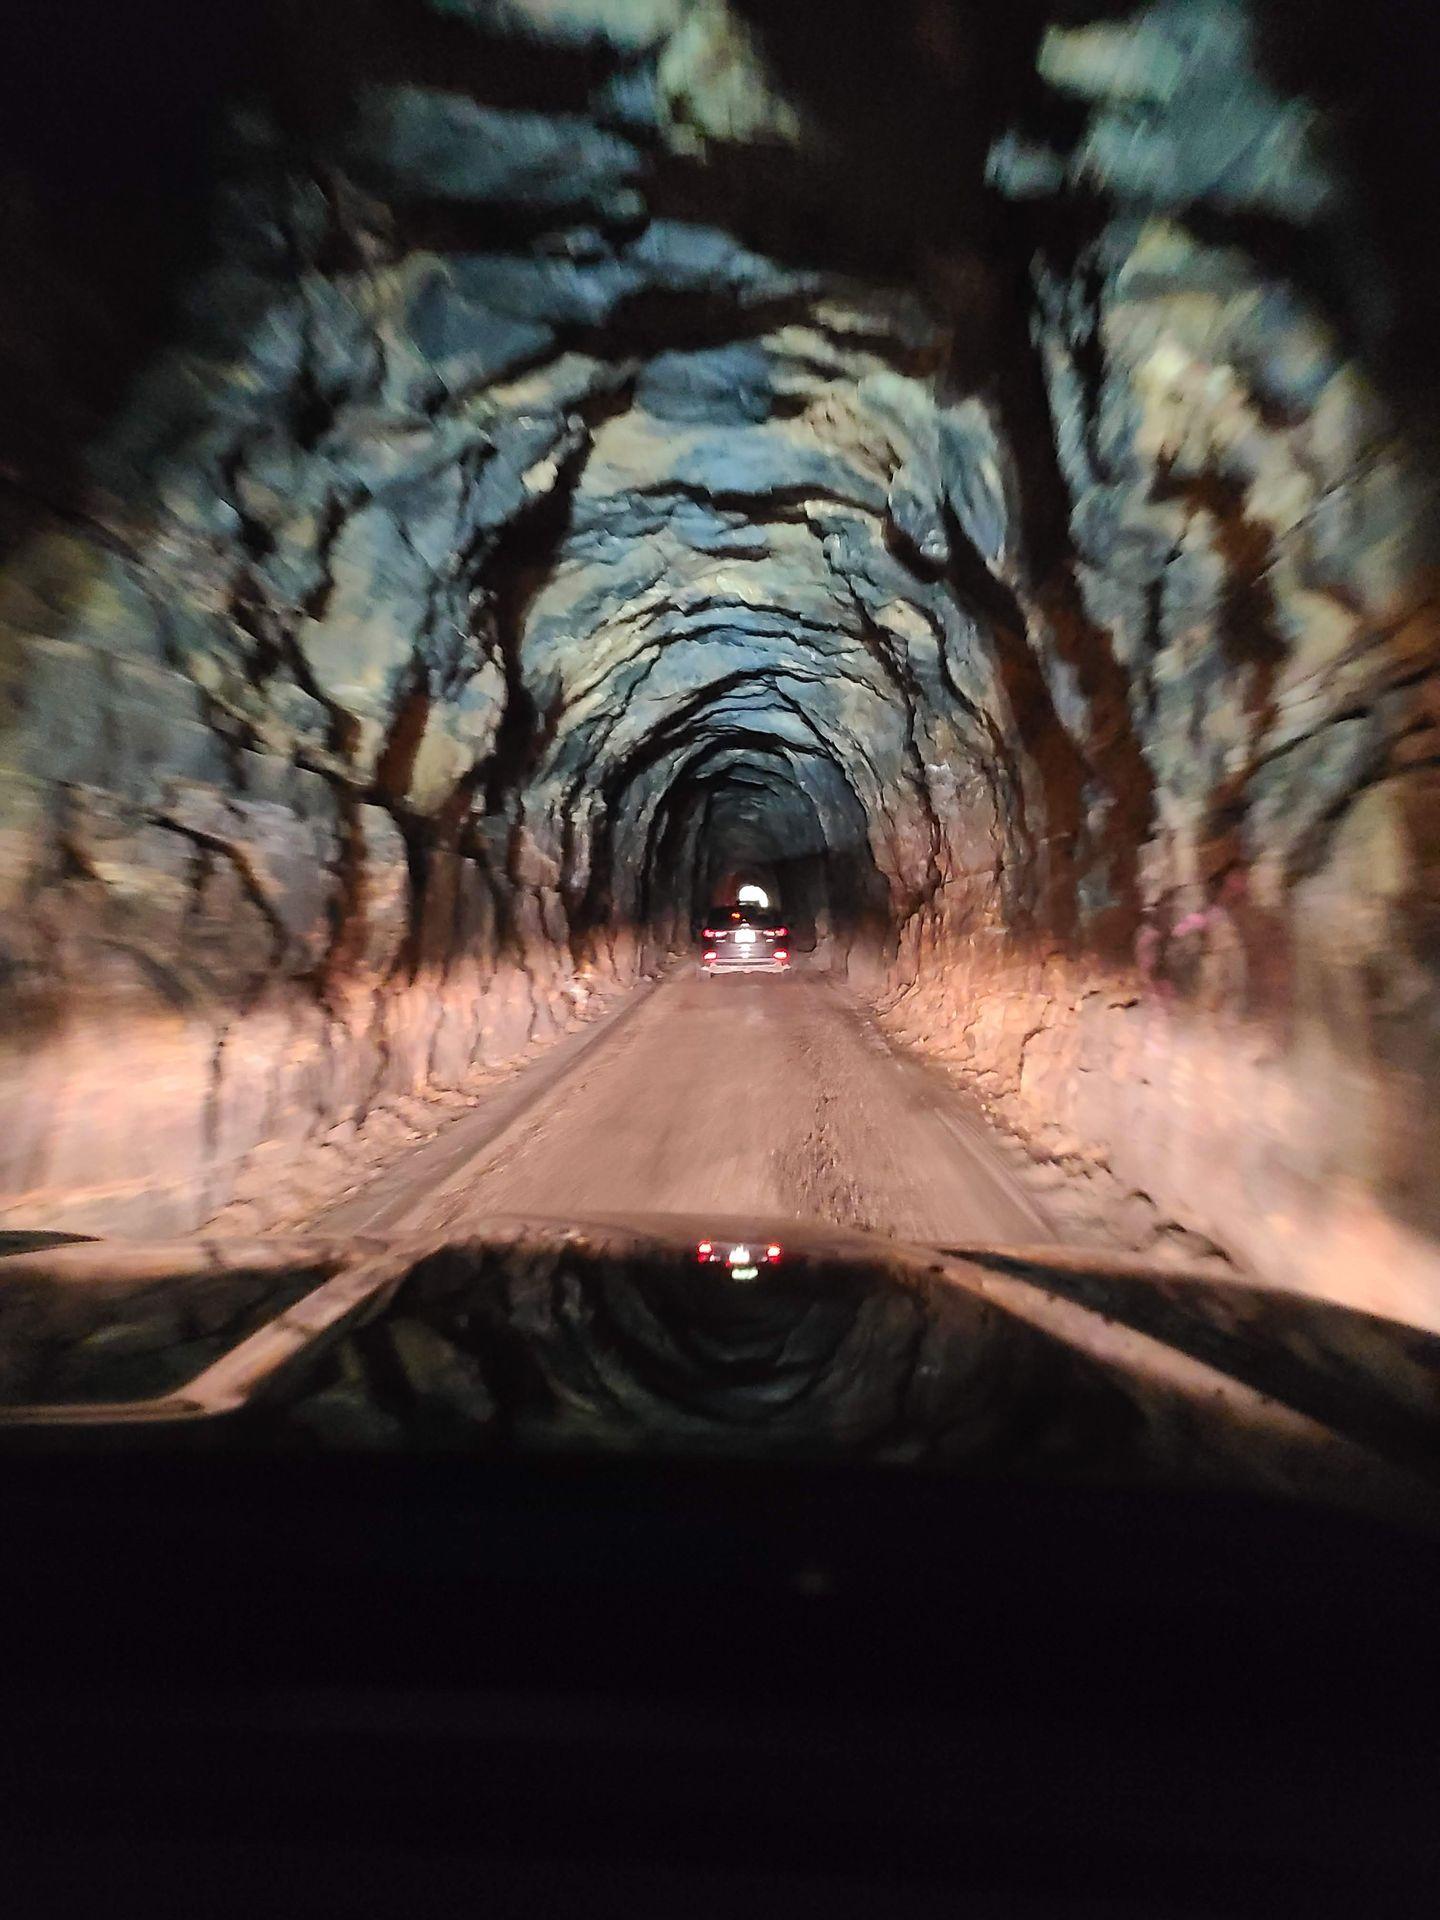 The inside of the Nada Tunnel, a narrow tunnel the size of a car